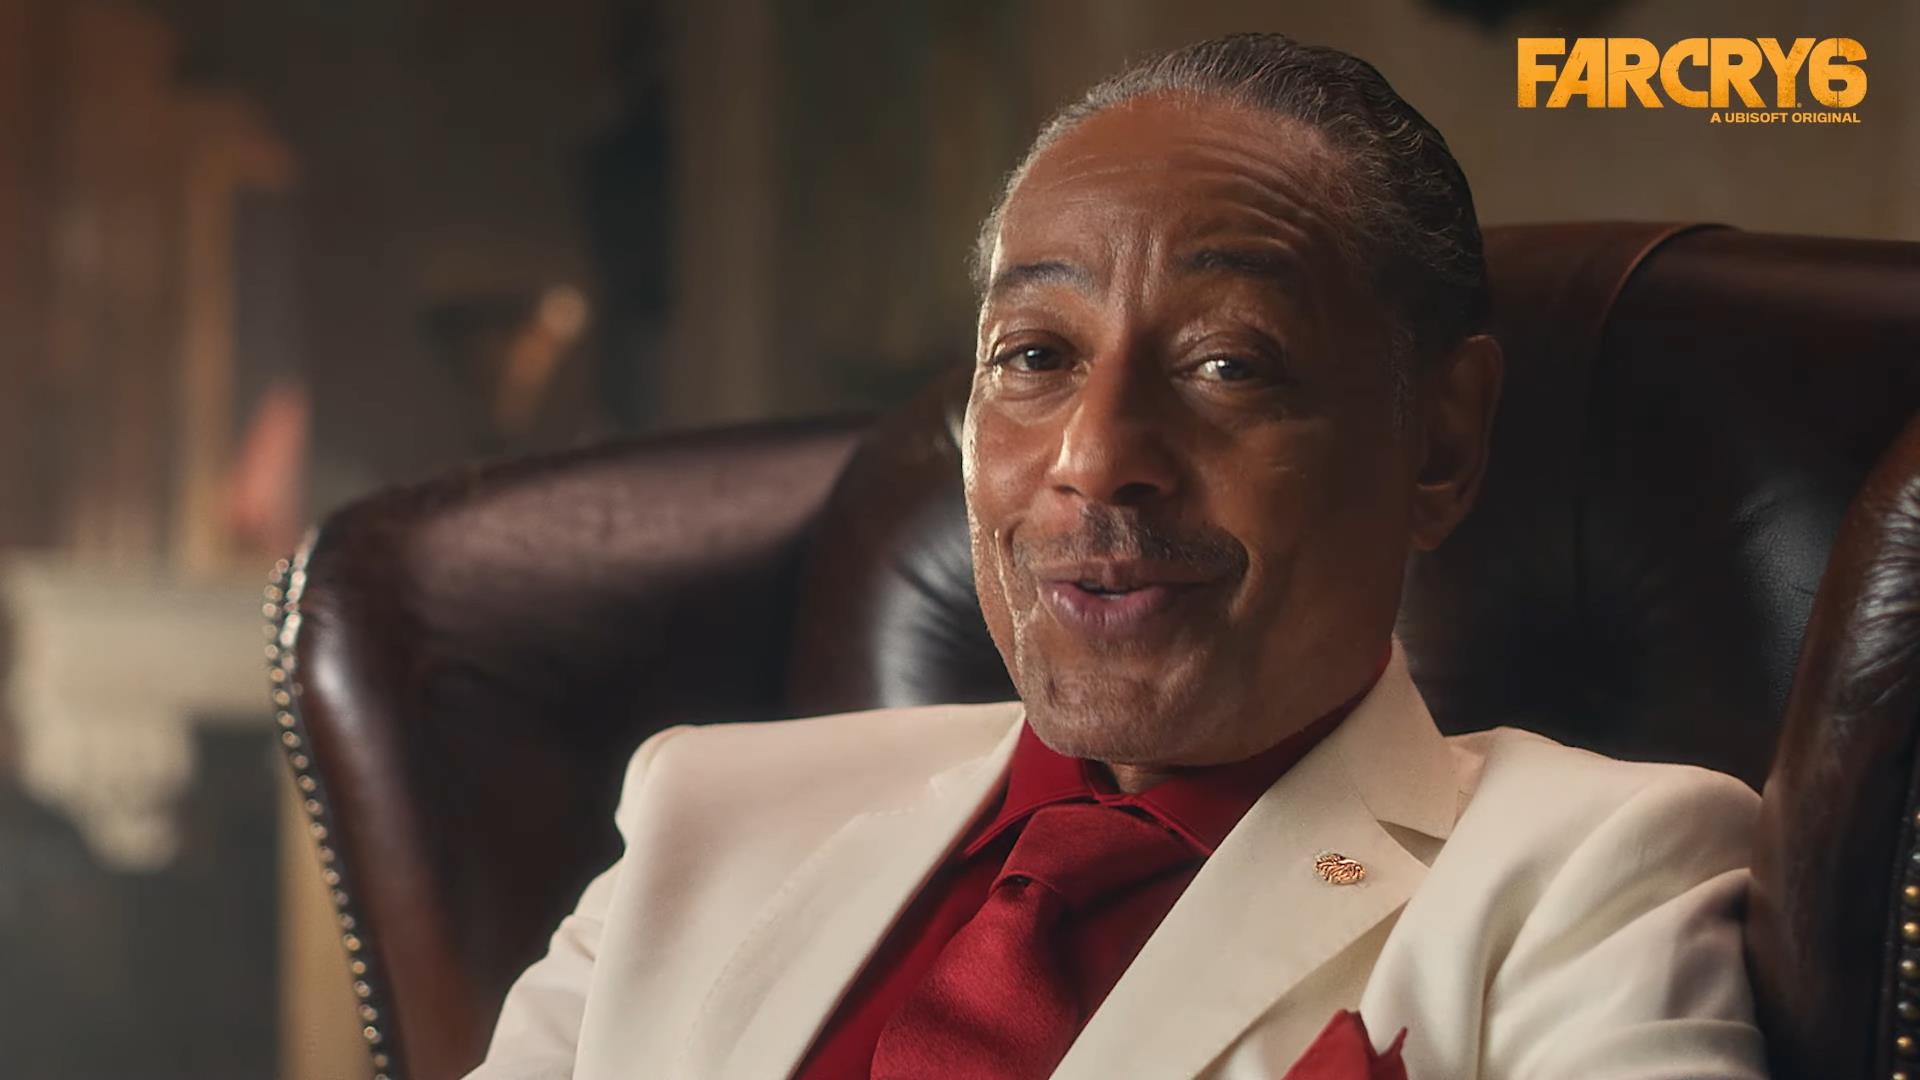 Image for Giancarlo Esposito has some very real Far Cry 6 tips for you